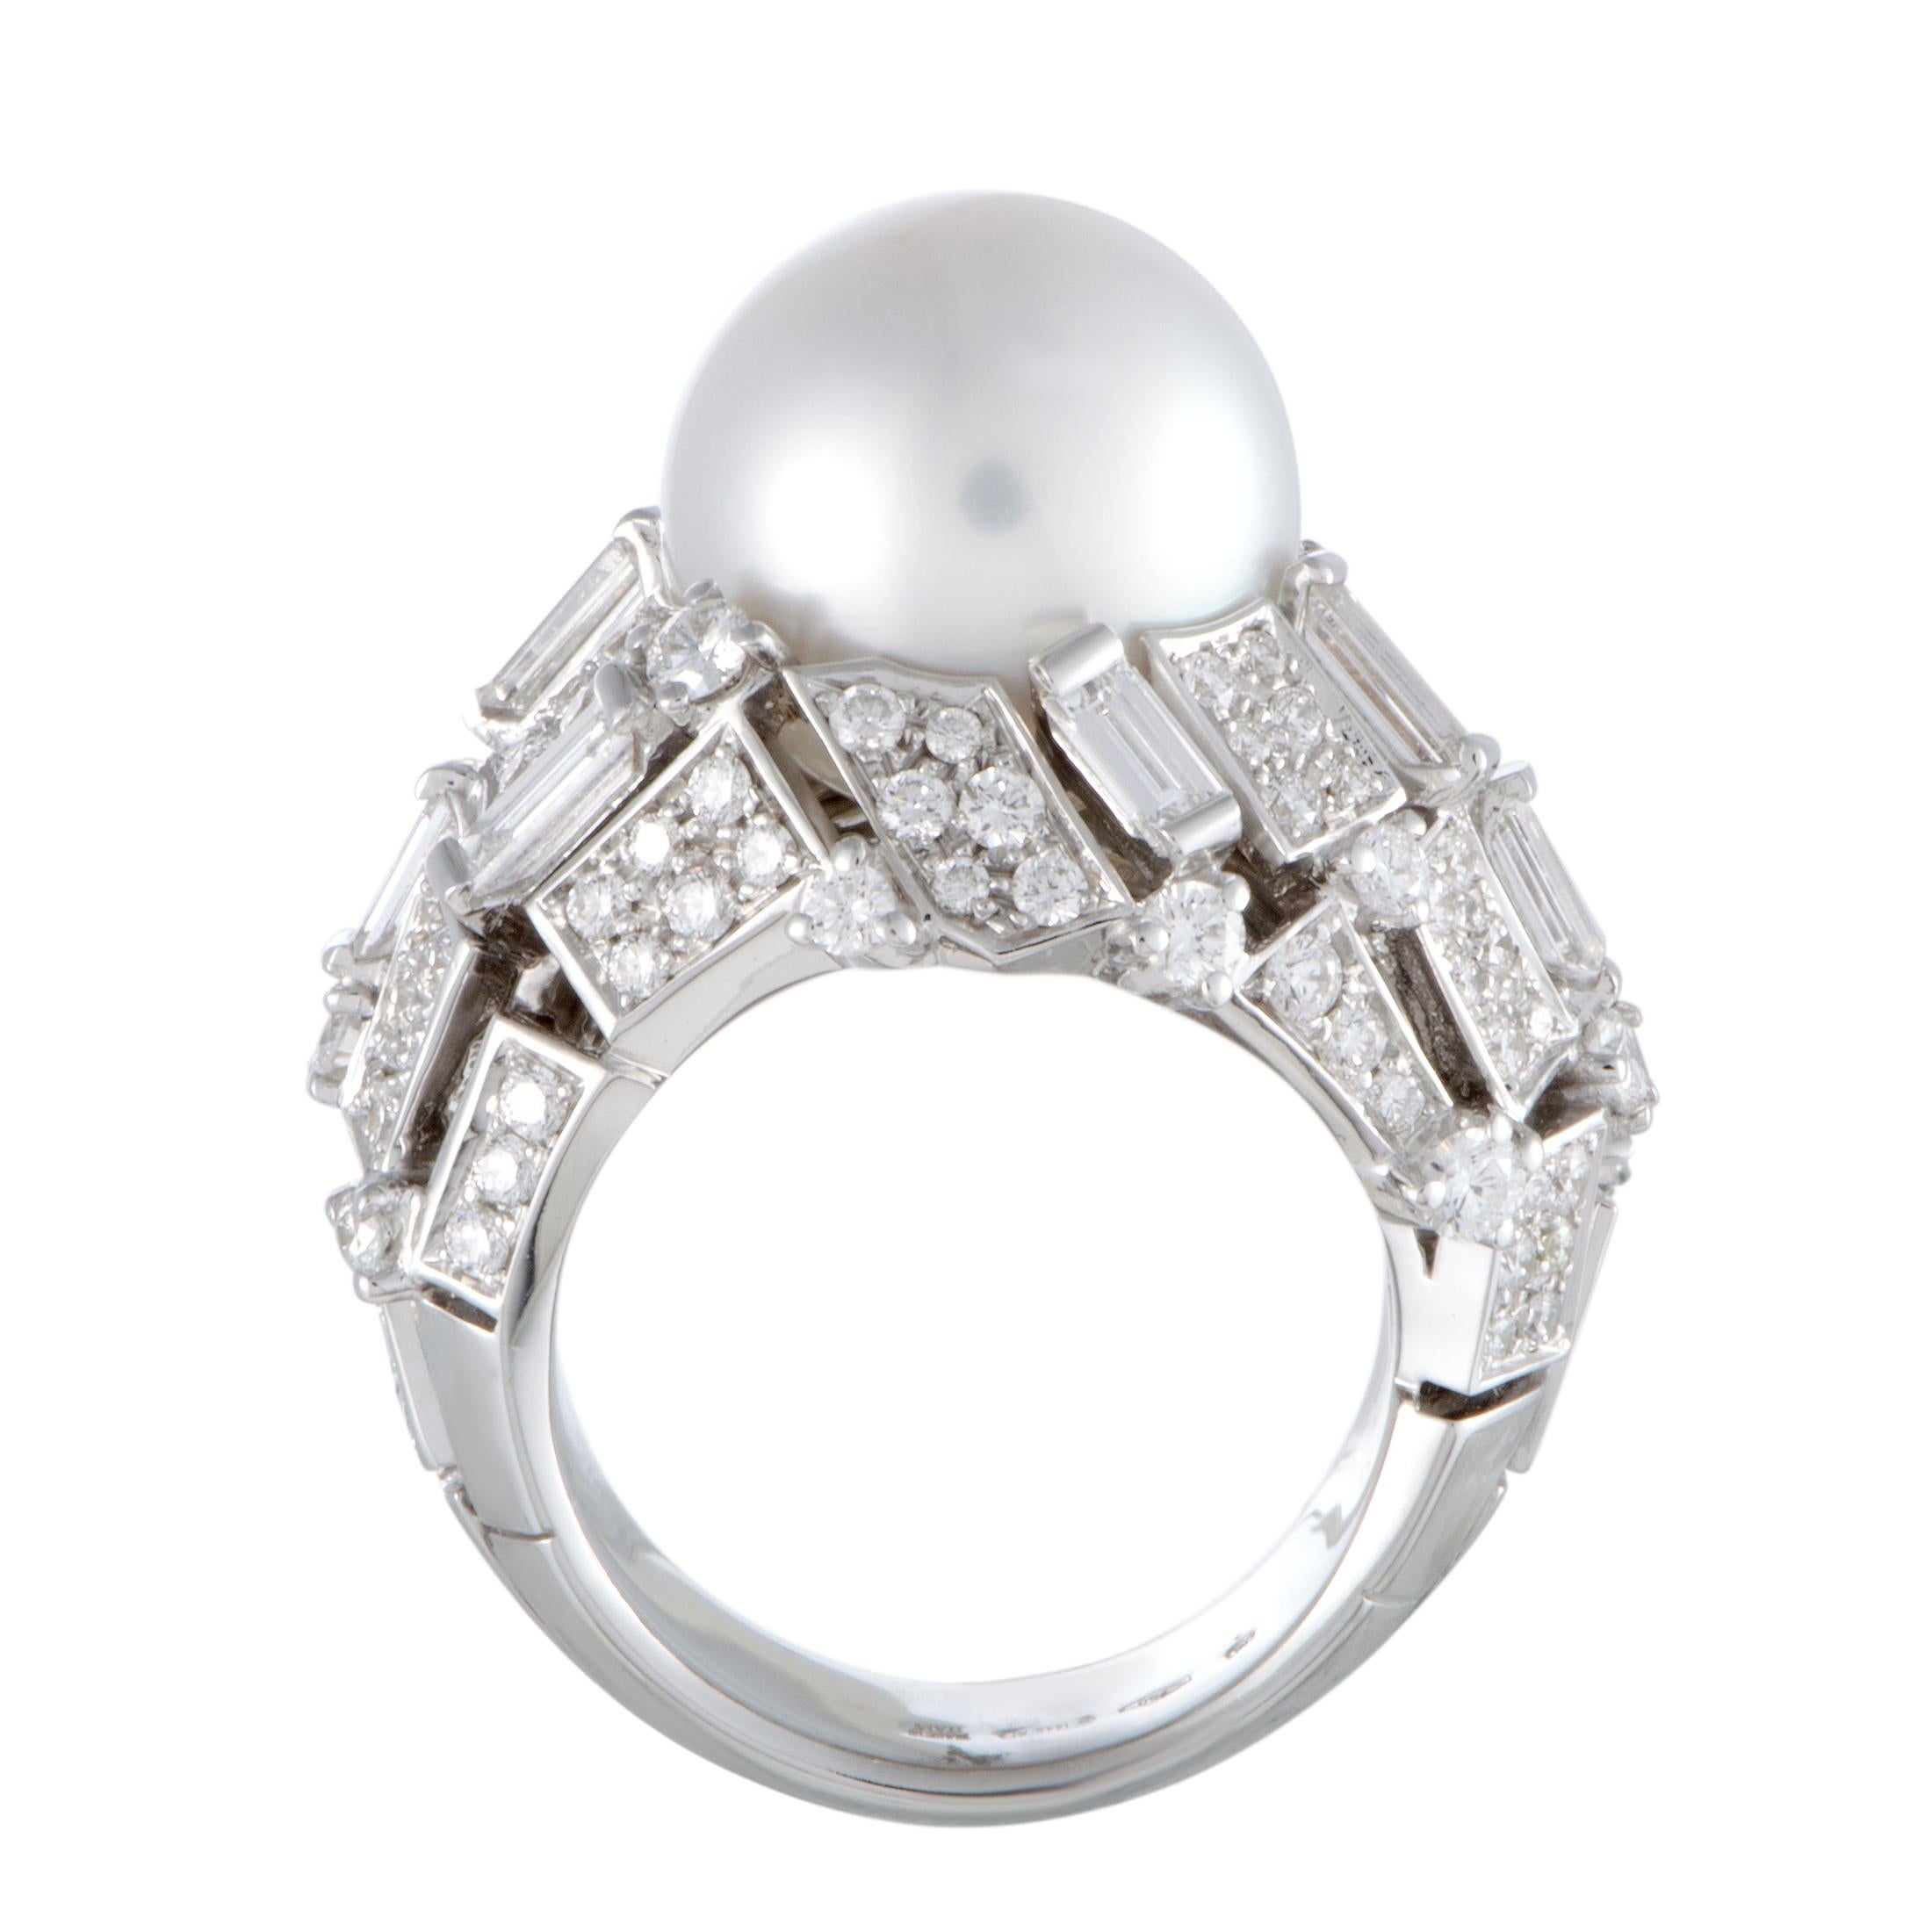 Sublime elegance and refined extravagance are embodied in this spectacular ring that boasts an incredibly eye-catching design topped off with irresistibly lustrous décor. The ring is presented by Mikimoto and it is masterfully crafted from